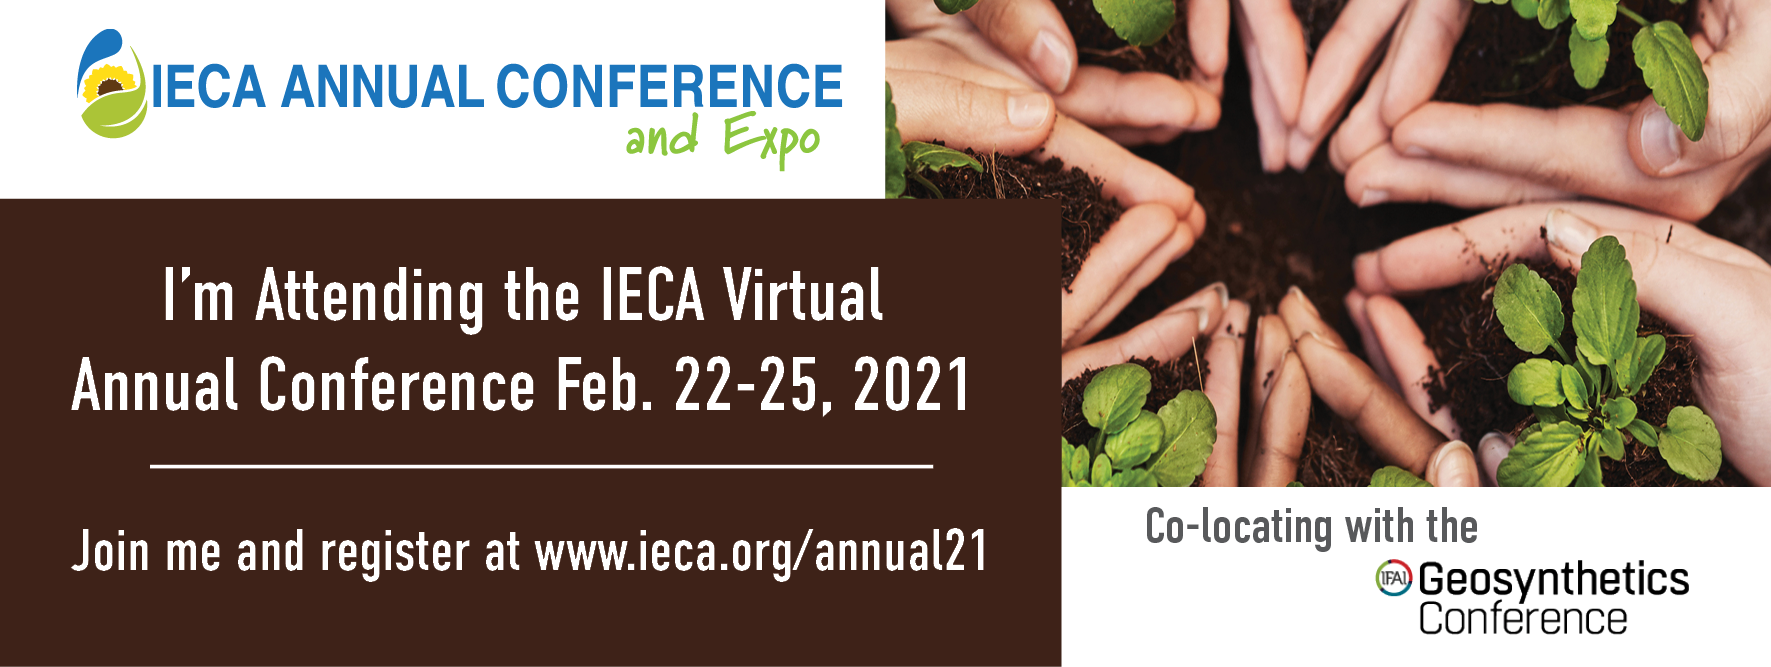 IECA 2021 Conference Announcement